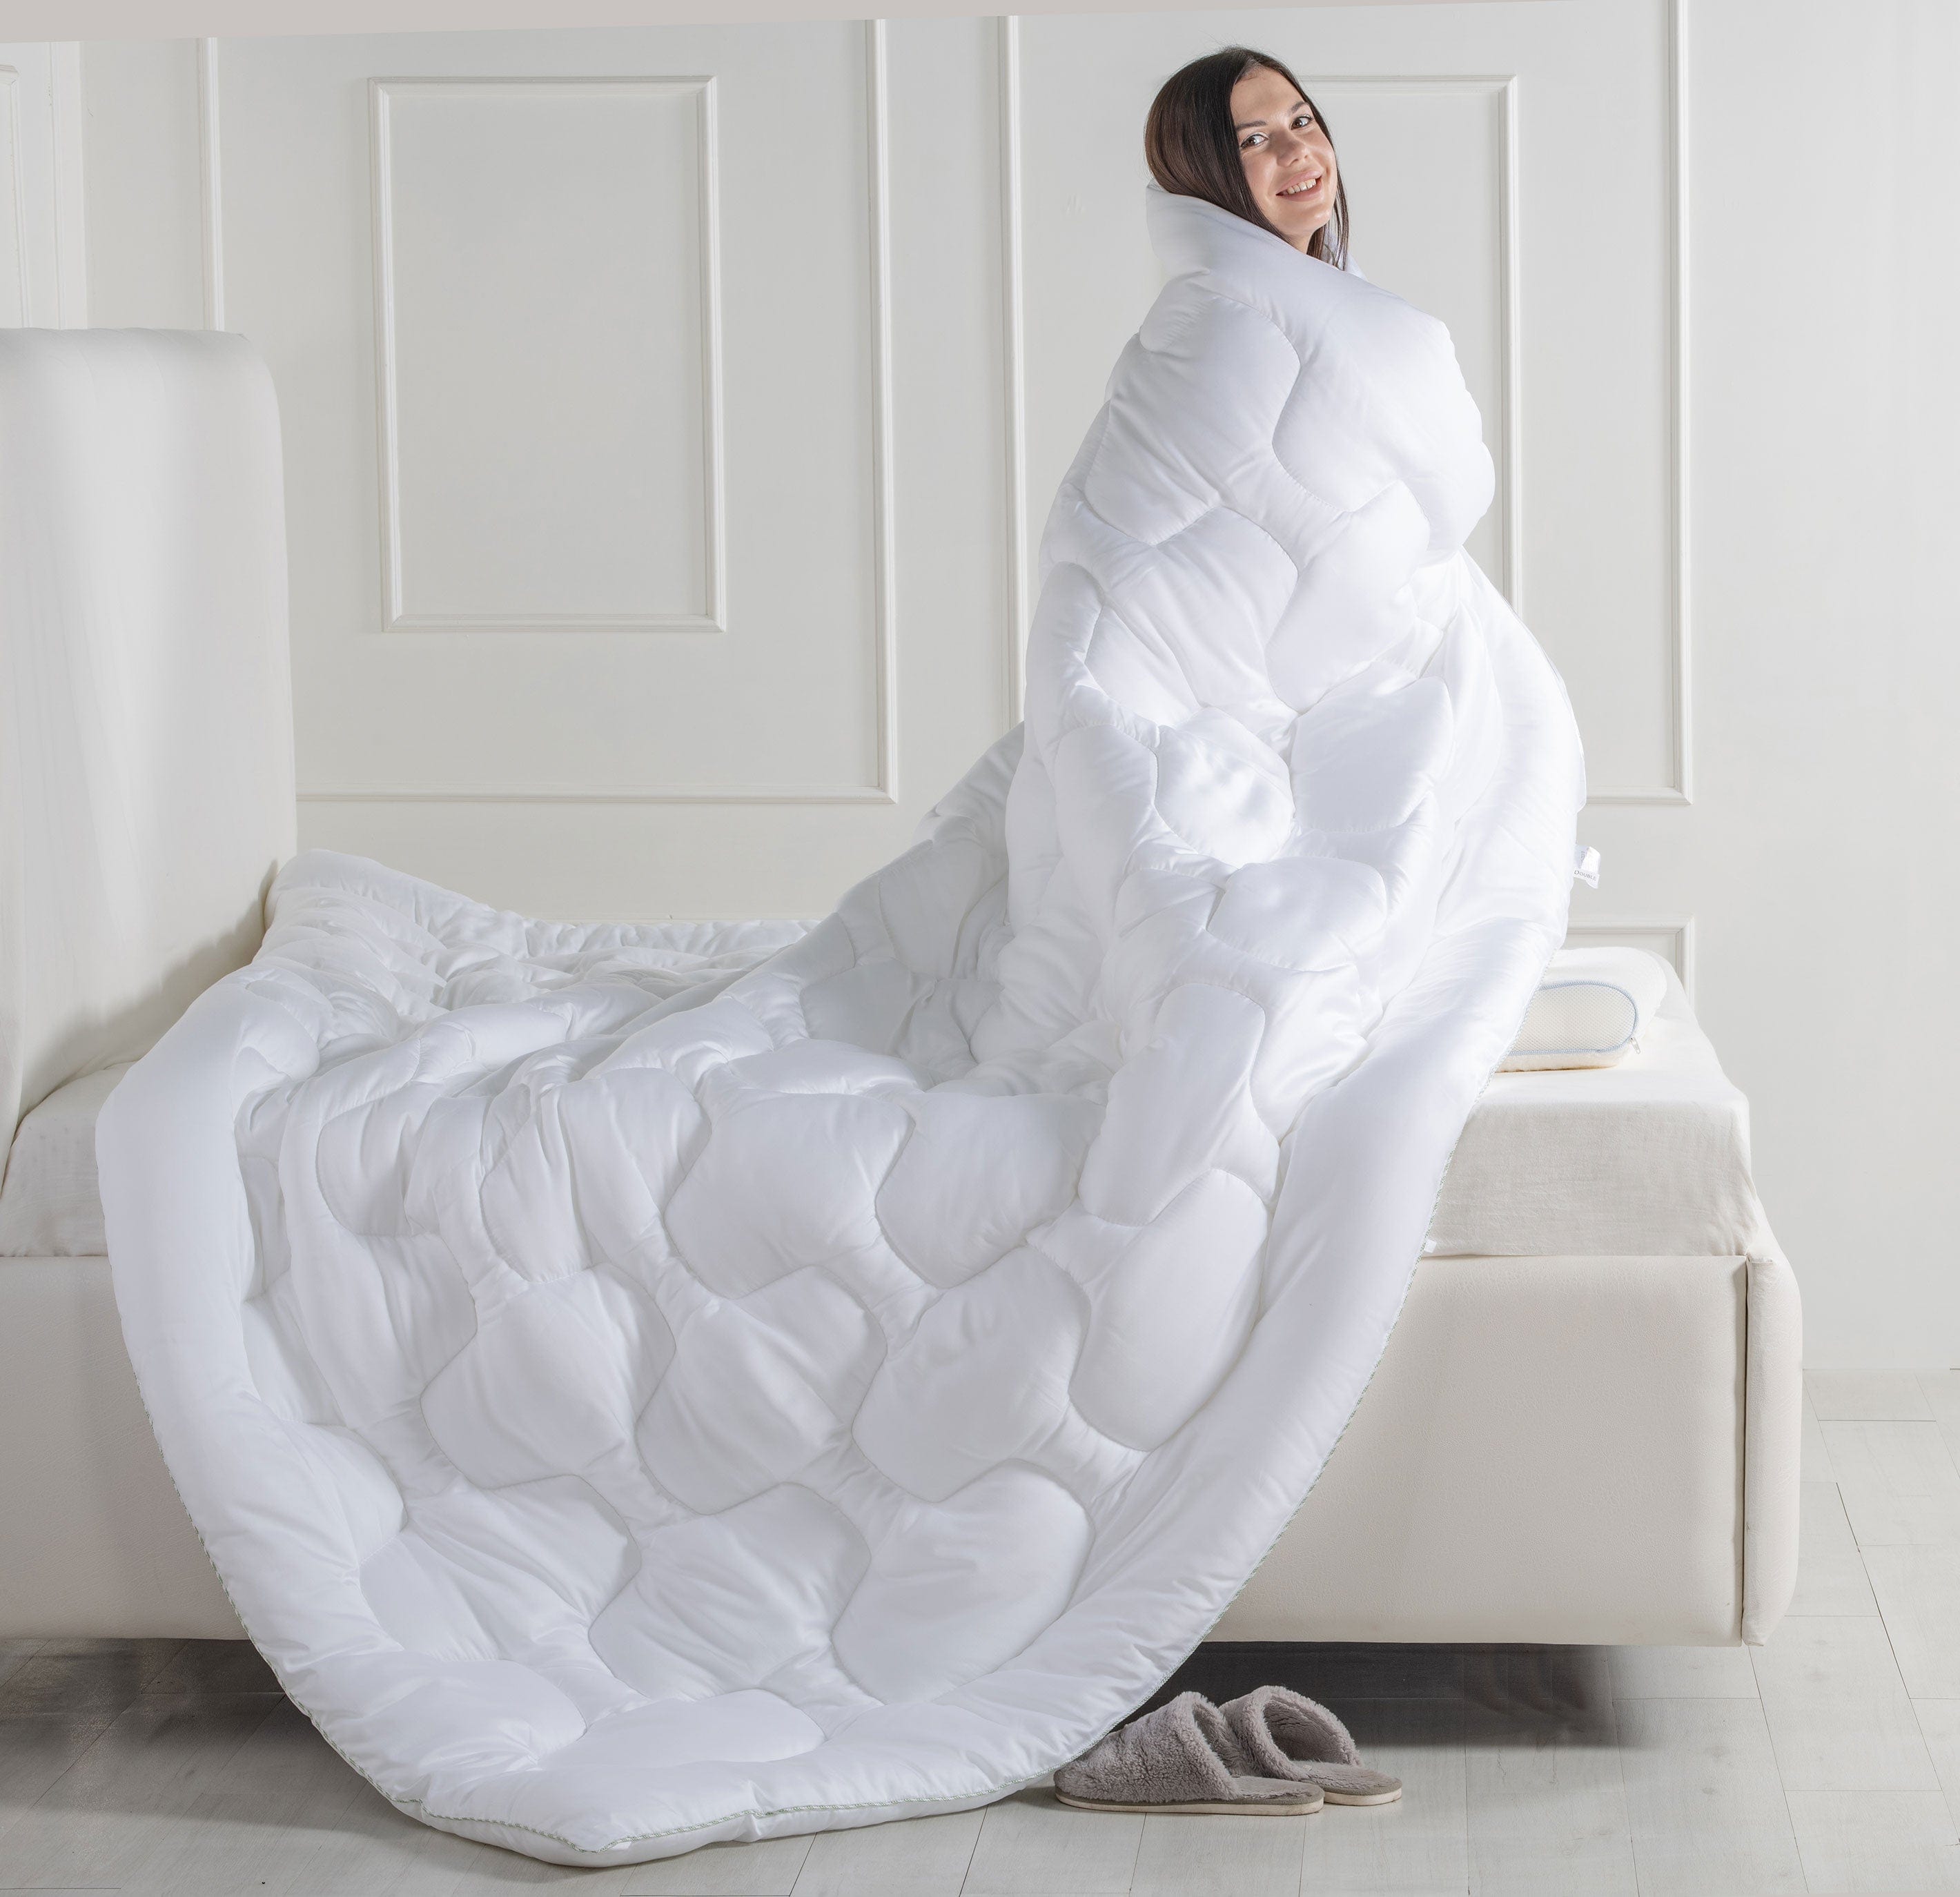 LIGHTWEIGHT EXTREME WINTER QUILT/COMFORTER  MADE FROM EXTRACTS OF NATURAL WOOD - TENCEL™ - TENCEL QUILT( CERTIFIED BY A SWISS LABORATORY)